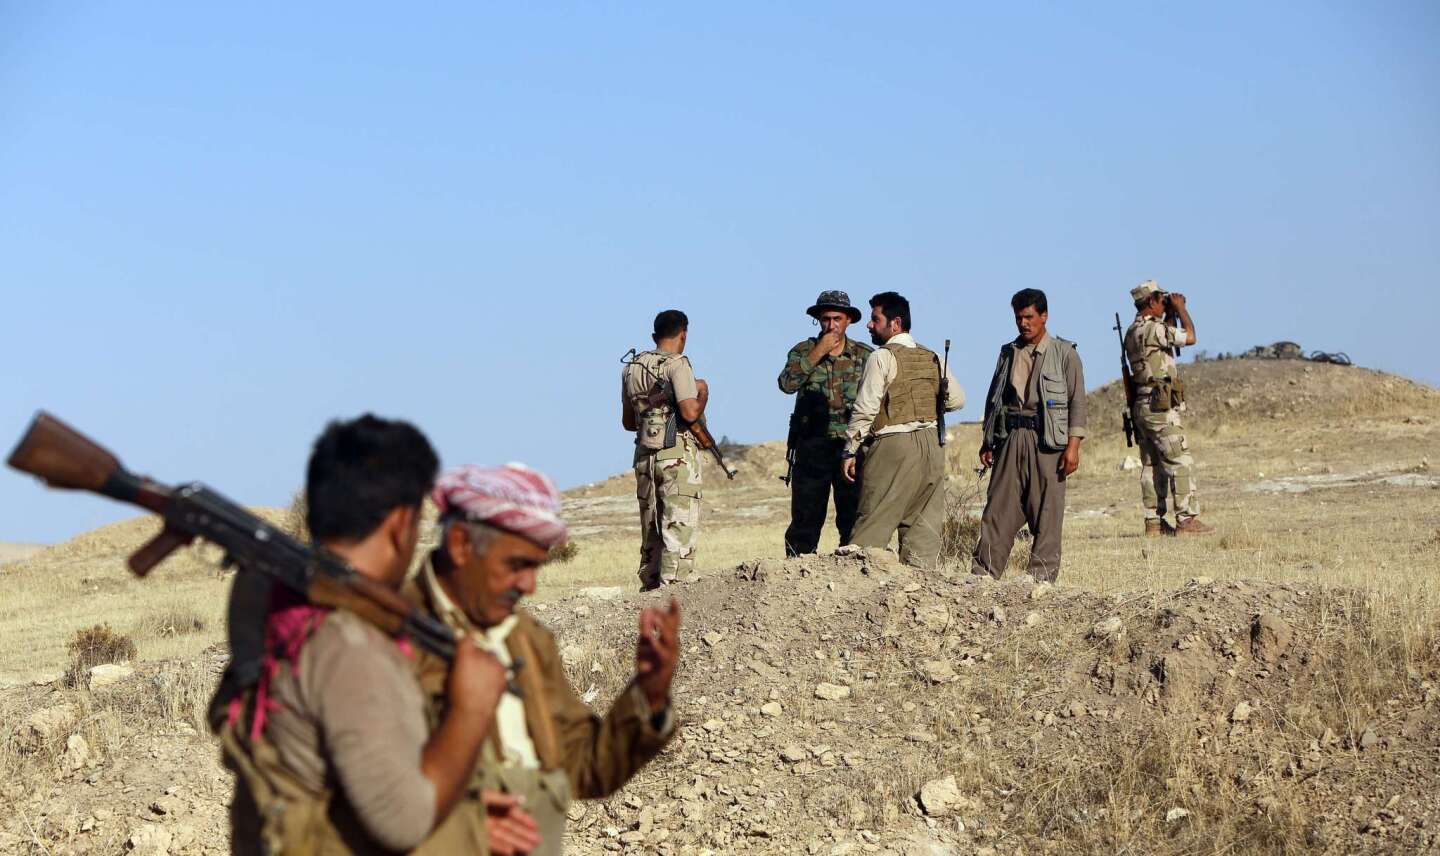 Kurdish Peshmerga fighters take position near the militant-held city of Zumar in Iraq's Mosul province on Sept. 4. Iraqi security forces, bolstered by thousands of Shiite Muslim militiamen and ethnic Kurdish fighters, have clawed back ground northeast of Baghdad.